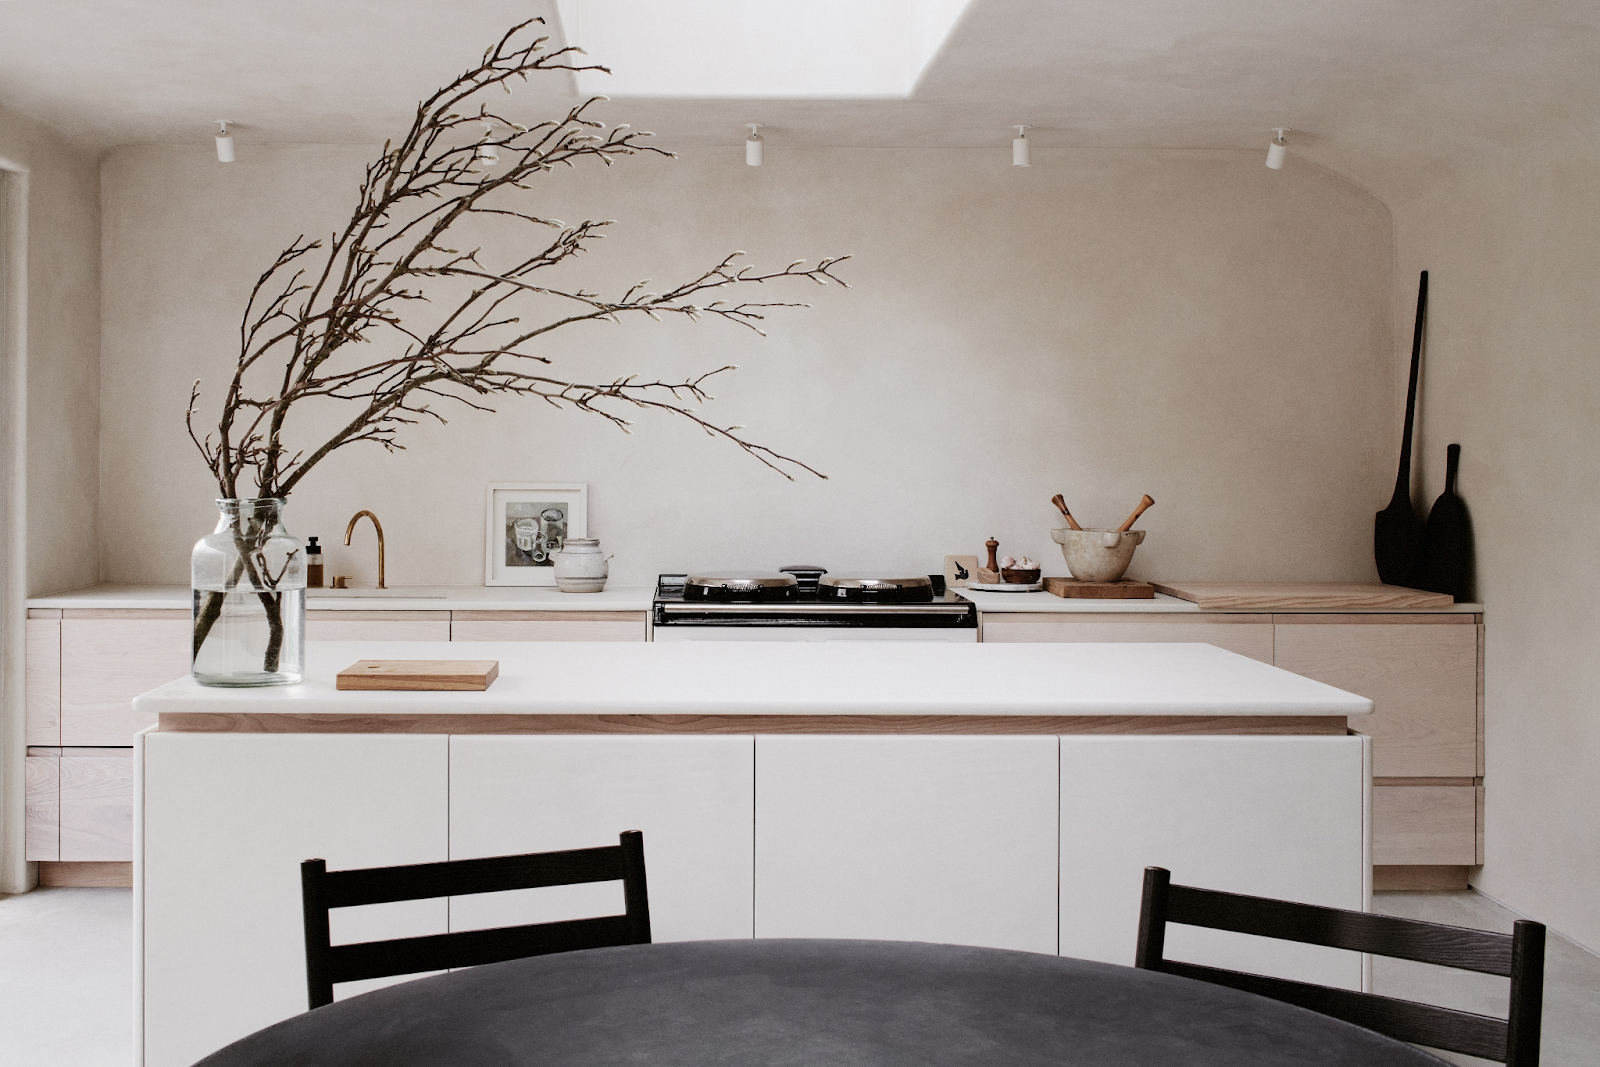 7 Simple Kitchen Ideas for a Beautiful Minimalist Home